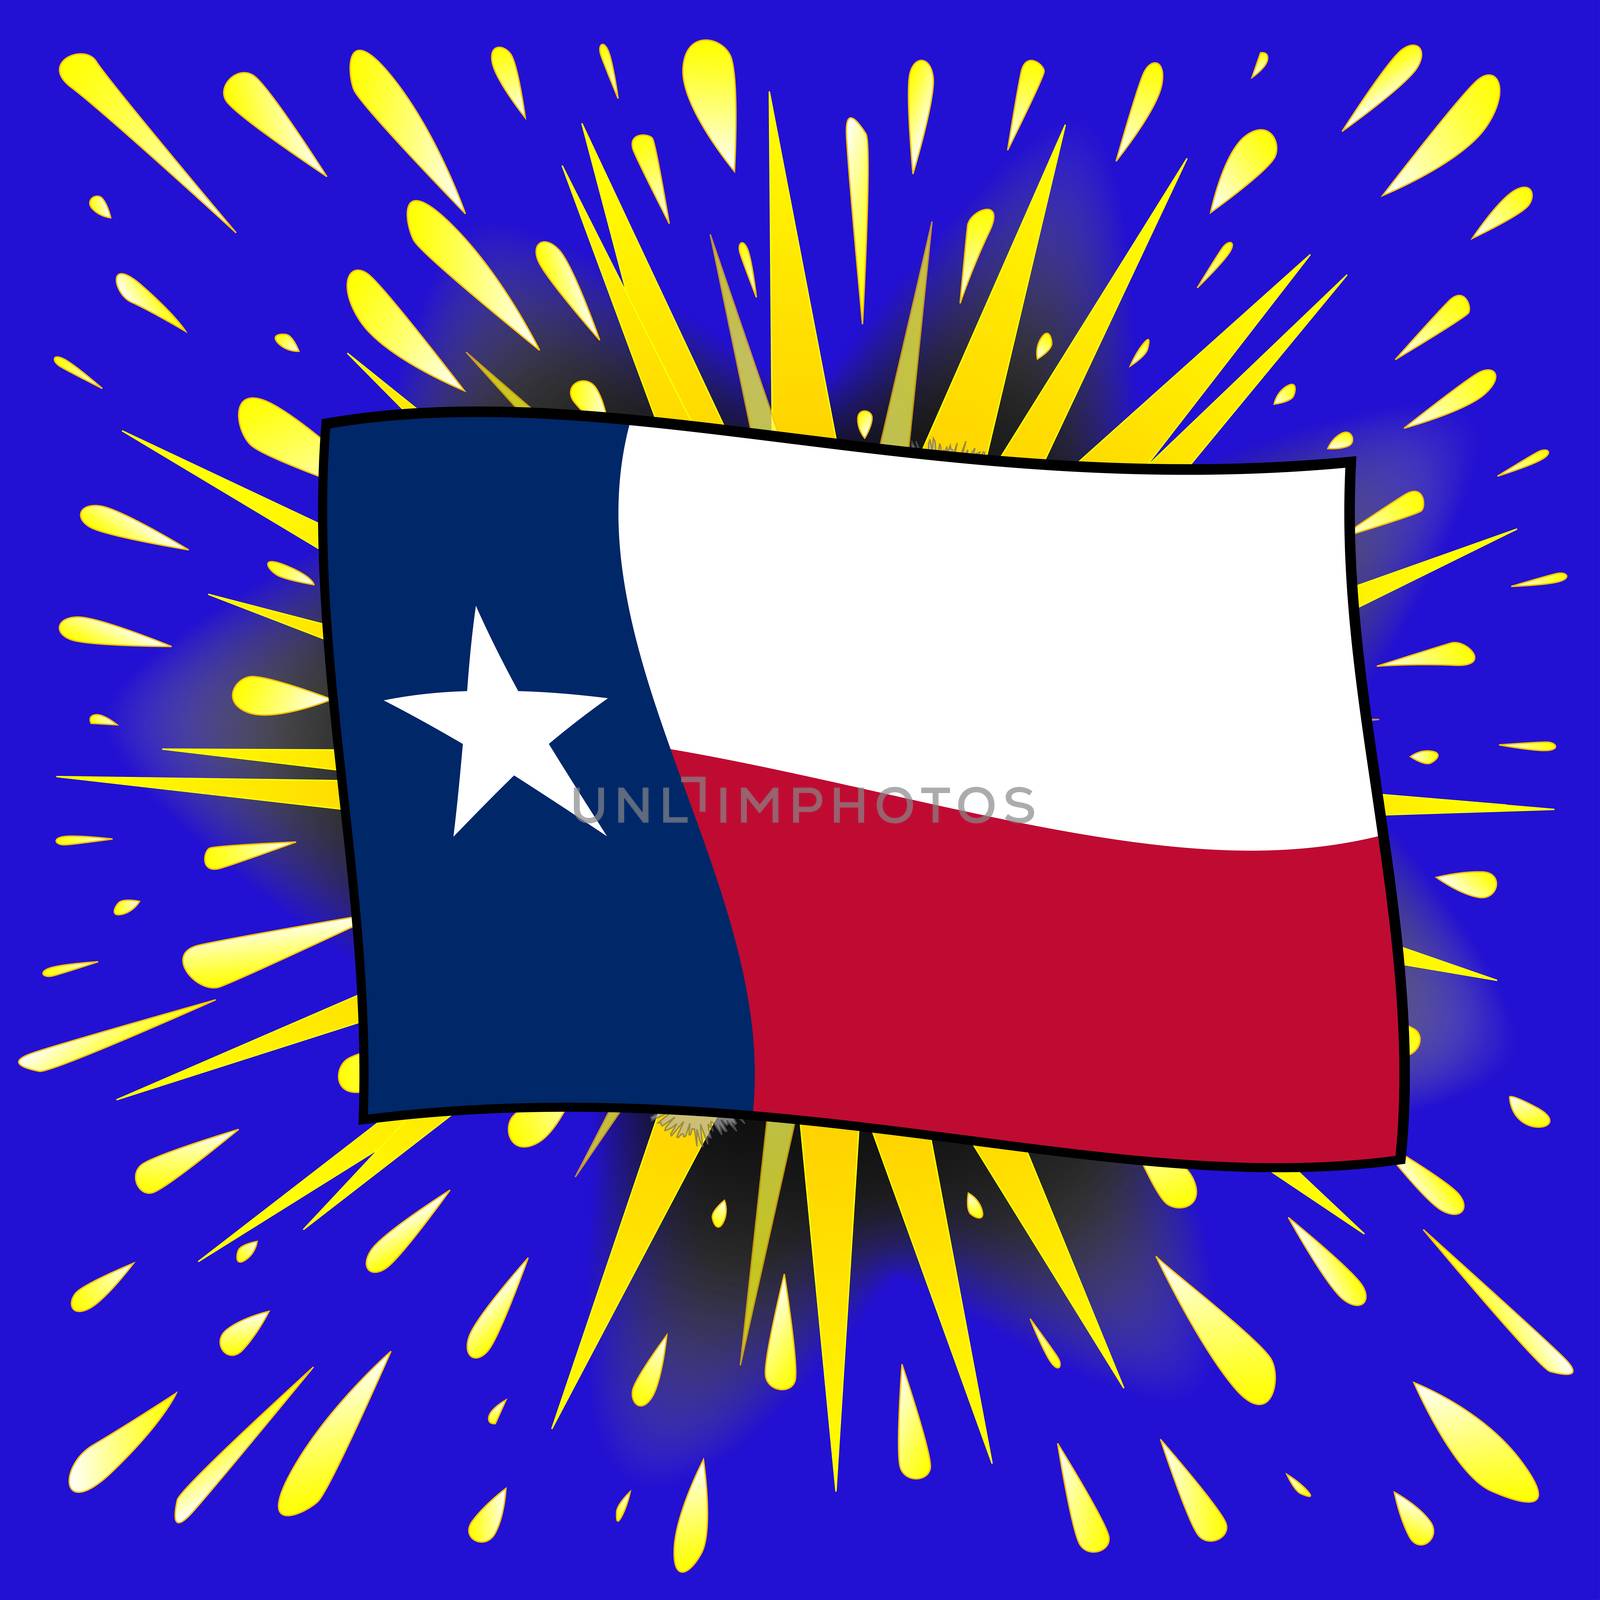 The flag of the USA state of TEXAS over a cartoon style explosion